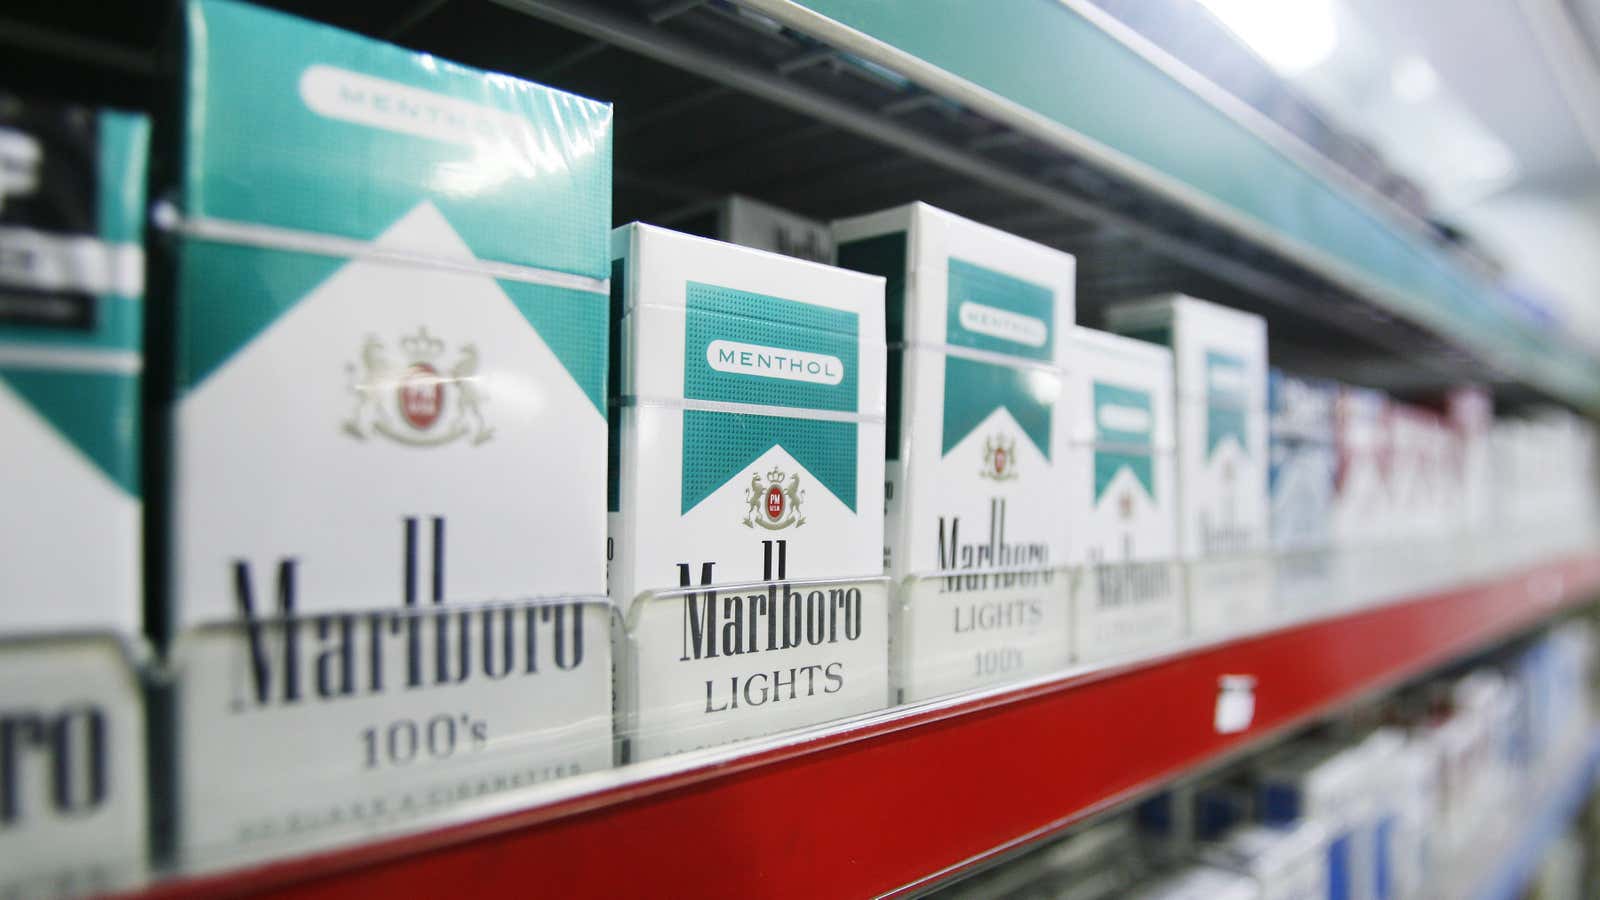 Philip Morris wants to make asthma medication—as well as the cigarettes that make asthma worse.